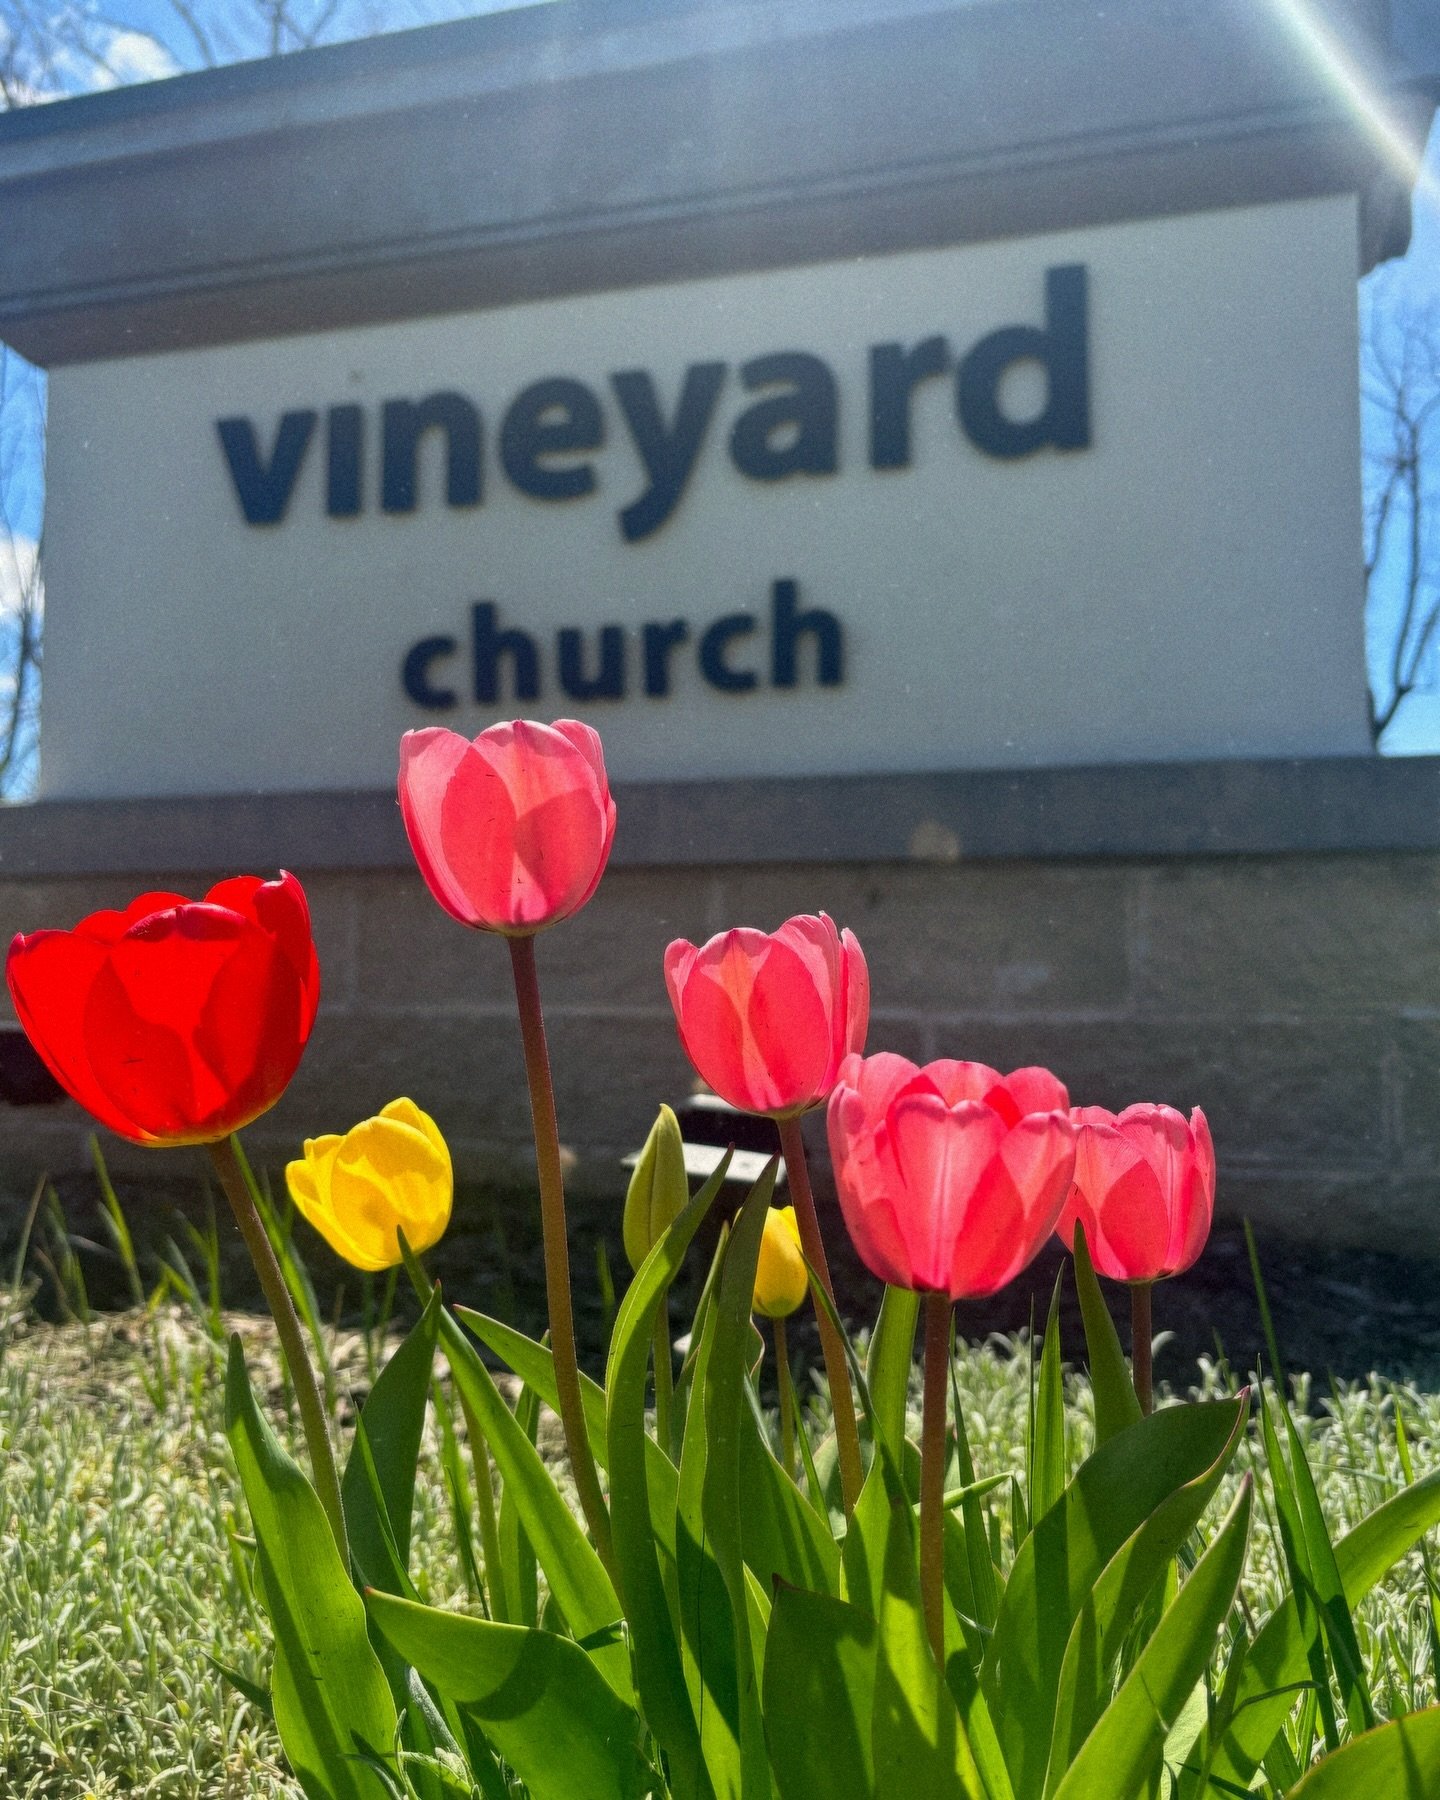 See you at church! 9:30am worship with an amazing potluck to follow! Can't wait to gather on this beautiful morning! 
#vineyardgrafton #lovegodloveothersperiod